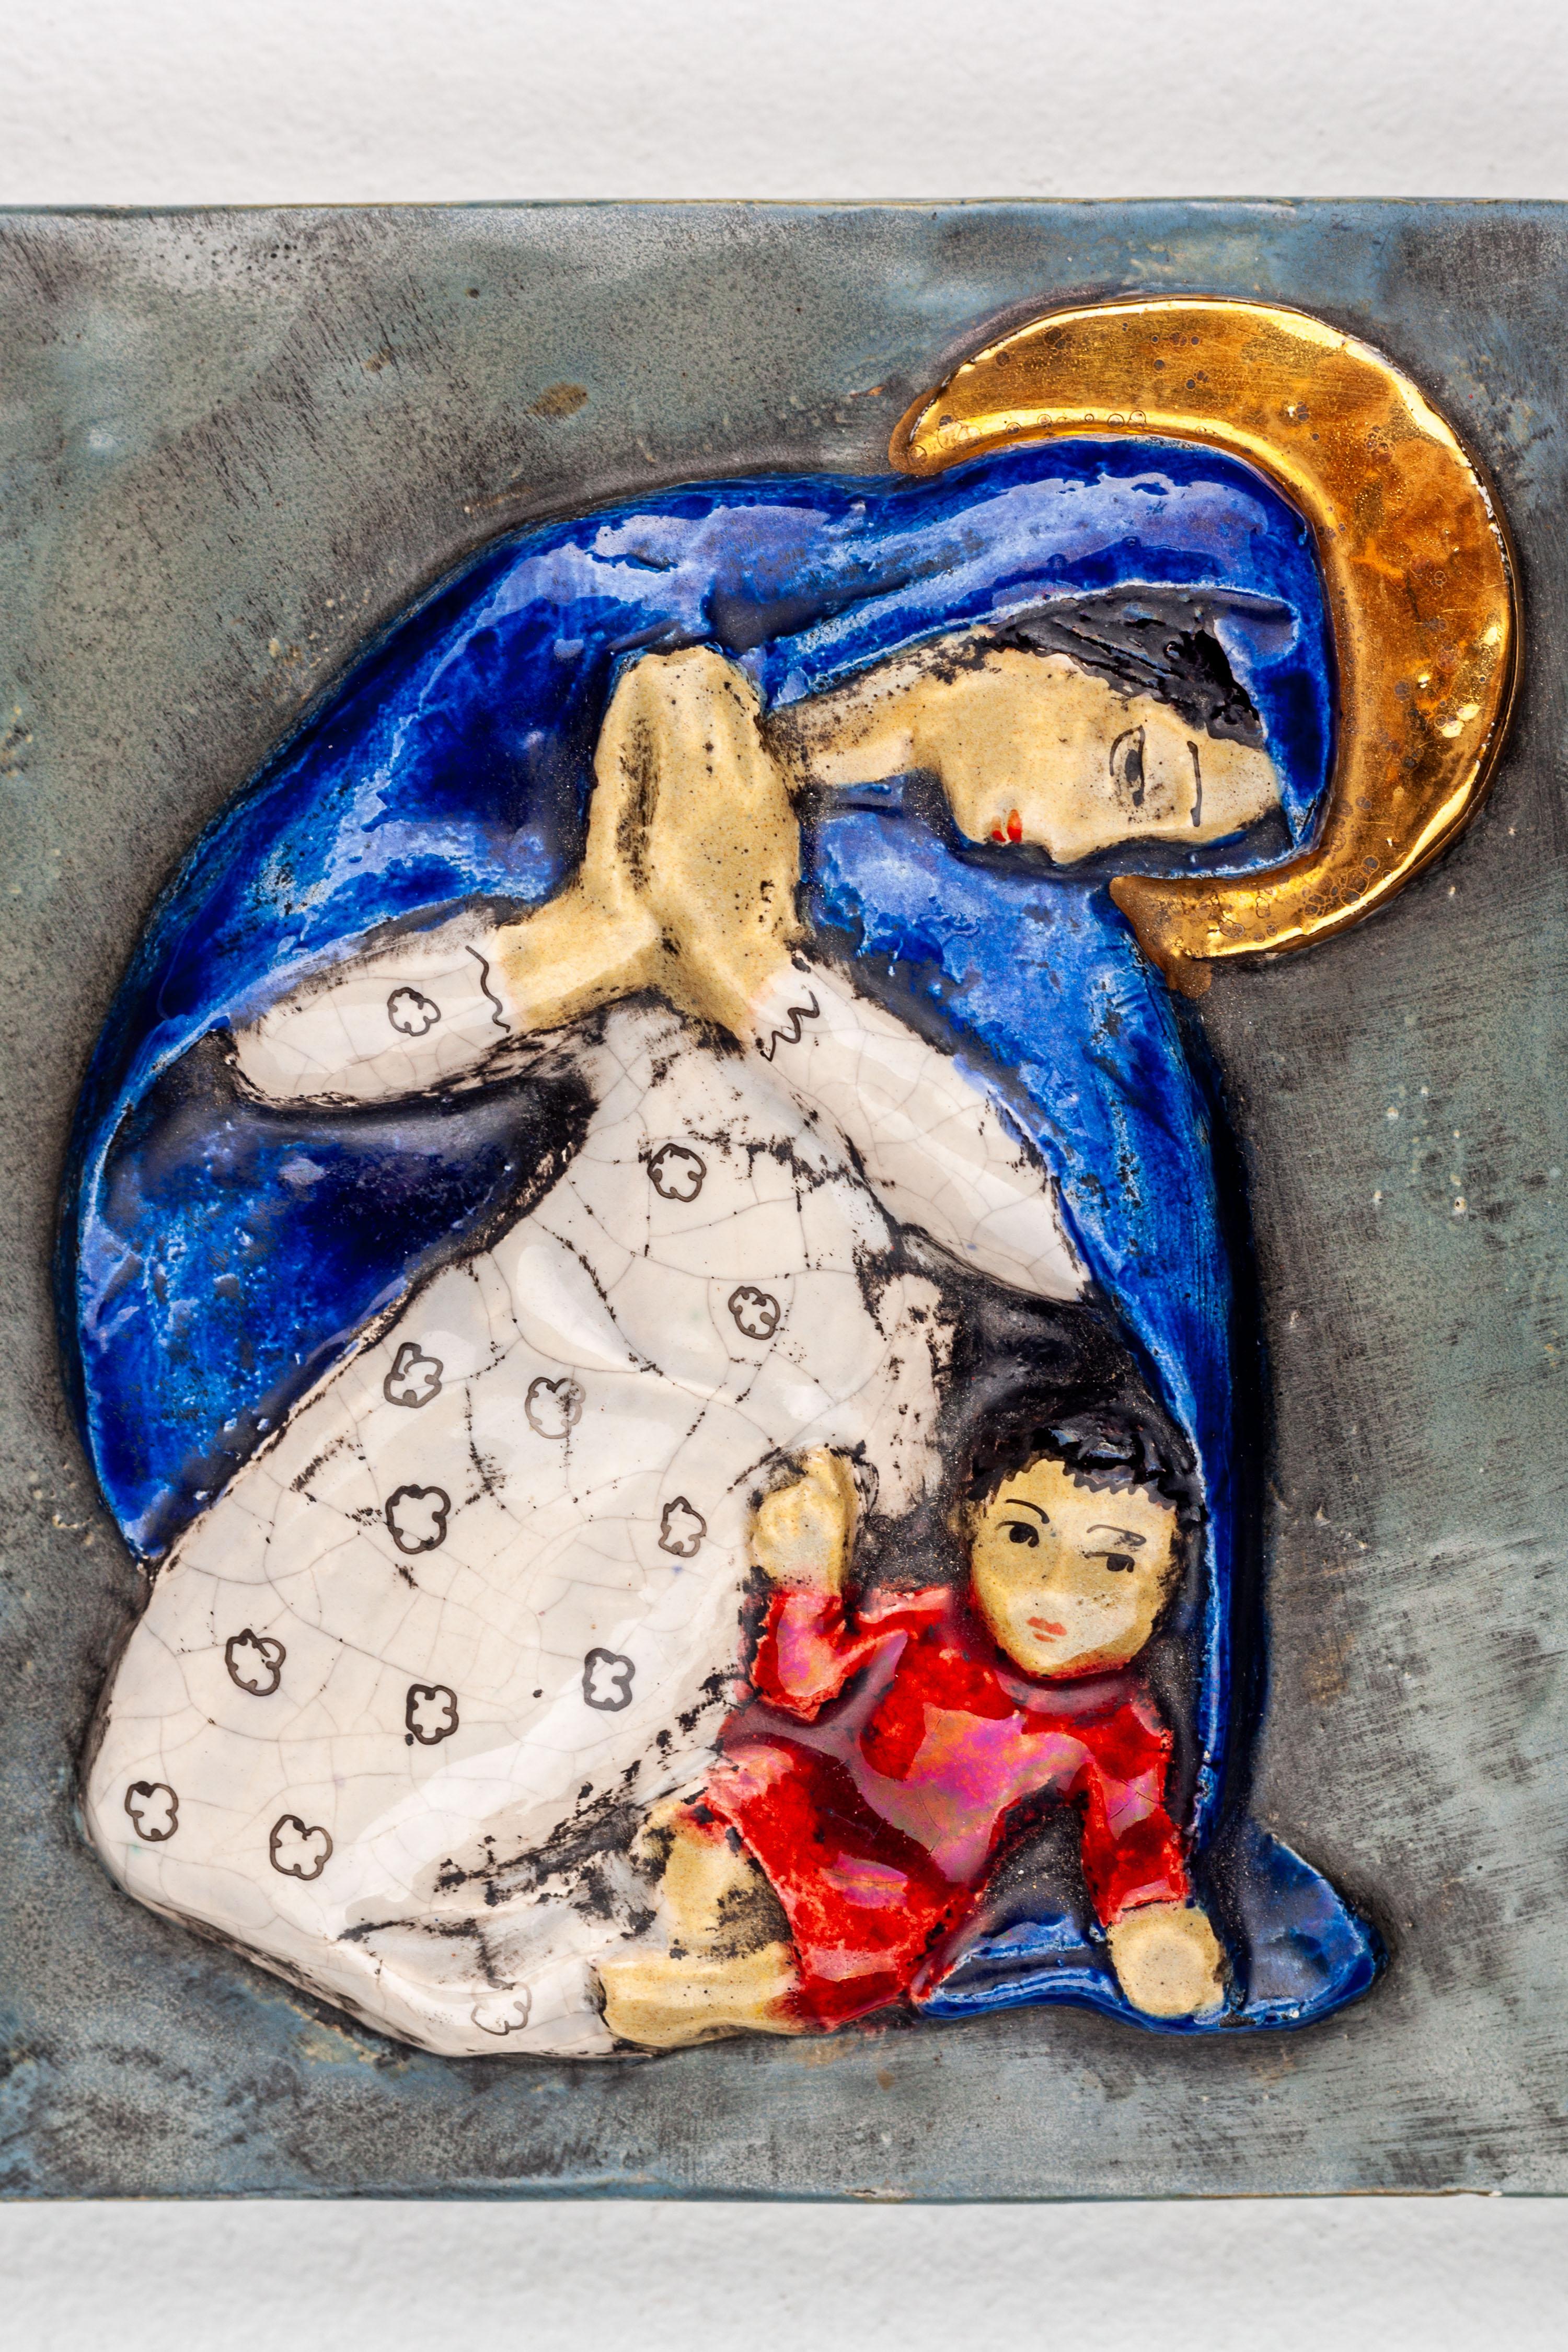 Virgin Mary and Child Jesus Wall Ceramic Decoration handmade by Modernist Studio Pottery artist. Virgin Mary with praying hands, wearing a white dress and night blue cape covering her head and shoulders, gold aureola. With playful Child Jesus in red